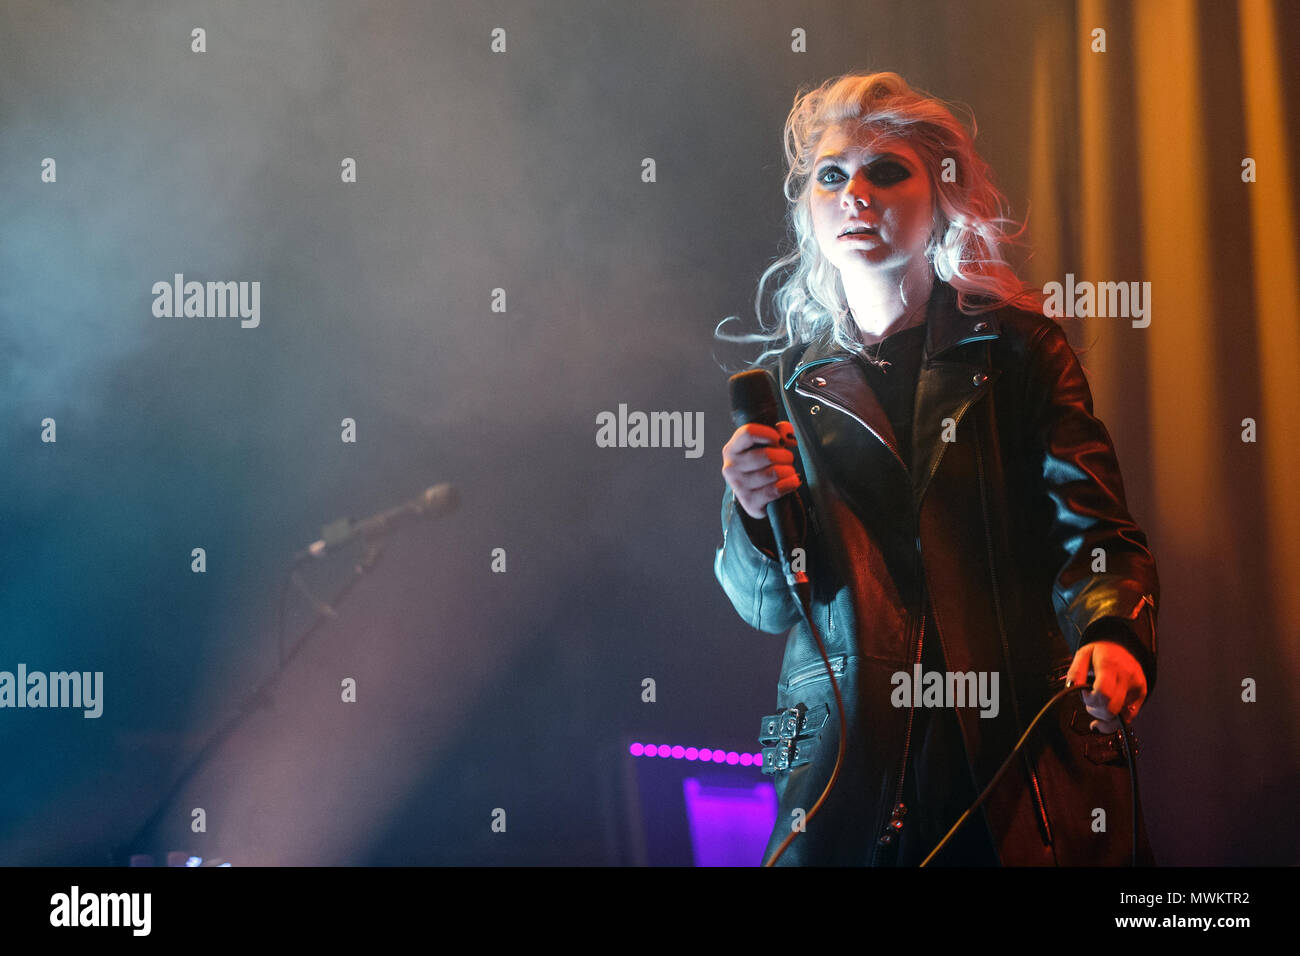 Taylor Momsen, lead singer of The Pretty Reckless, live onstage. Taylor Momsen singer, The Pretty Reckless singer, The Pretty Reckless band. Stock Photo